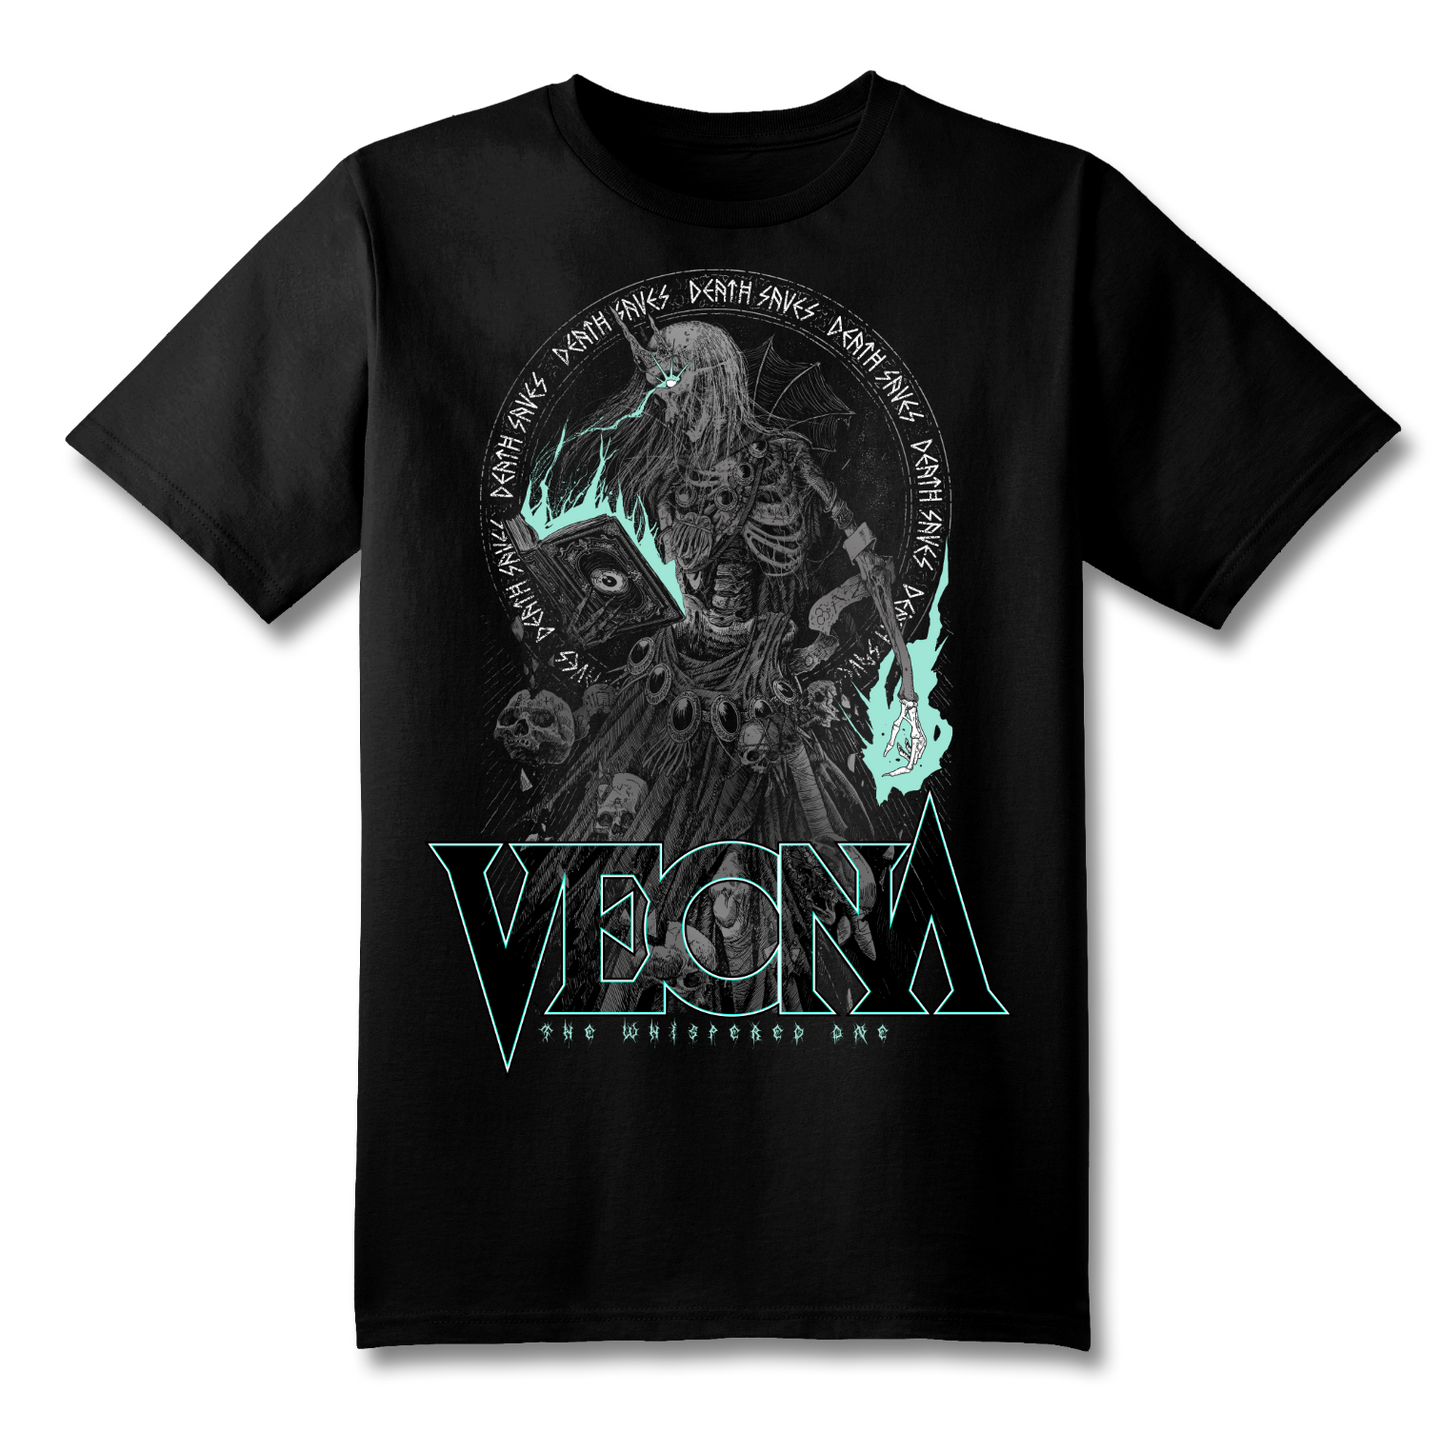 D&D Vecna Whispered One SS T-Shirt (3M/Glow in the Dark)